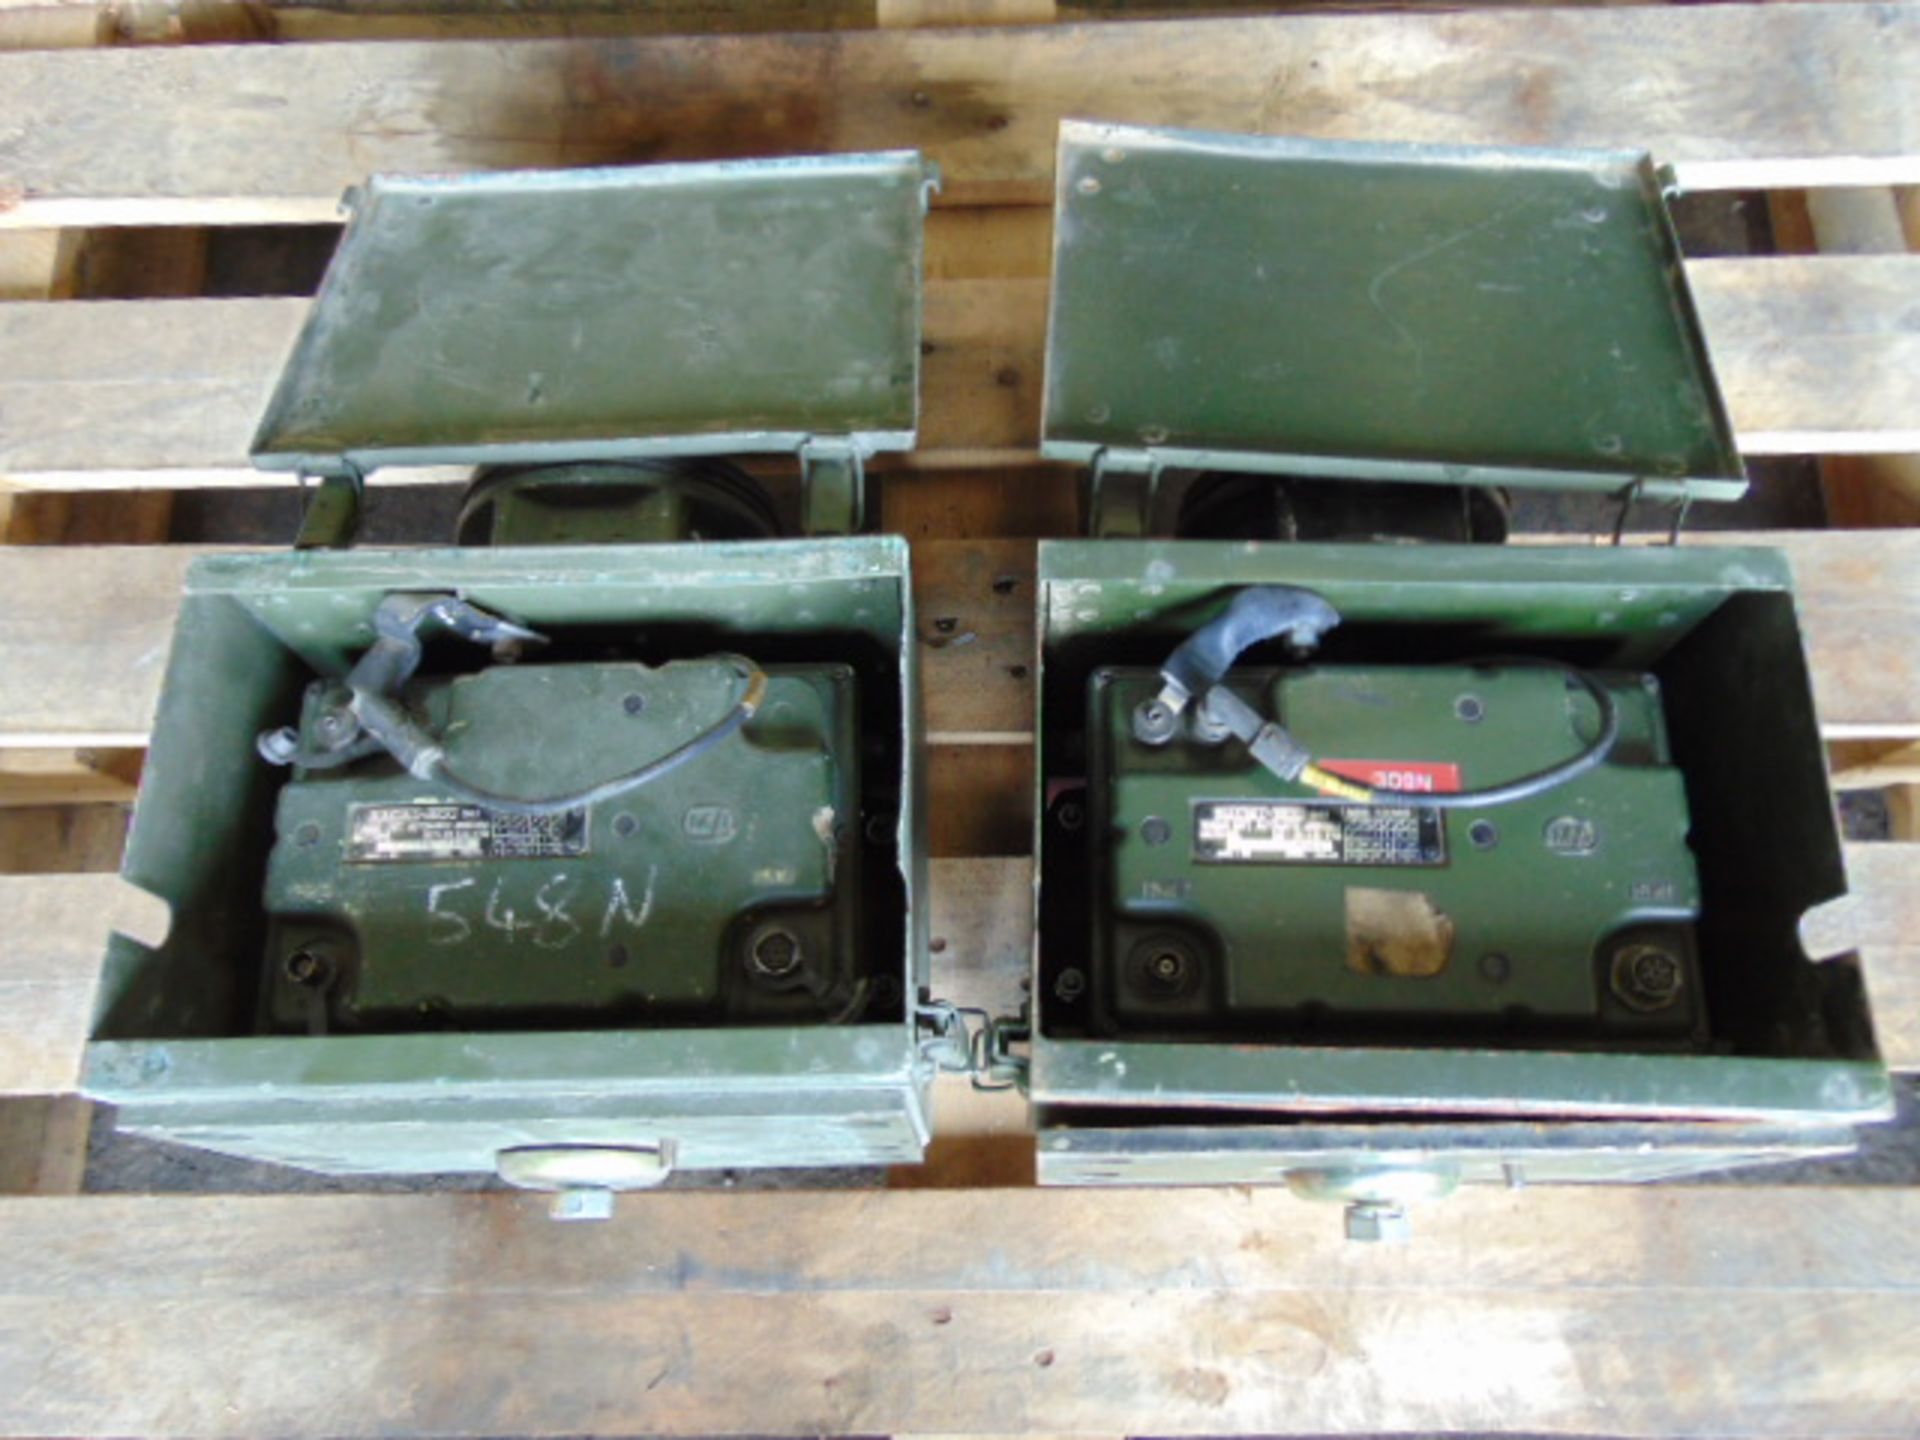 2 x Land Rover ATU Wing Boxes Complete with Aerial Bases and Tuaam's - Image 4 of 7